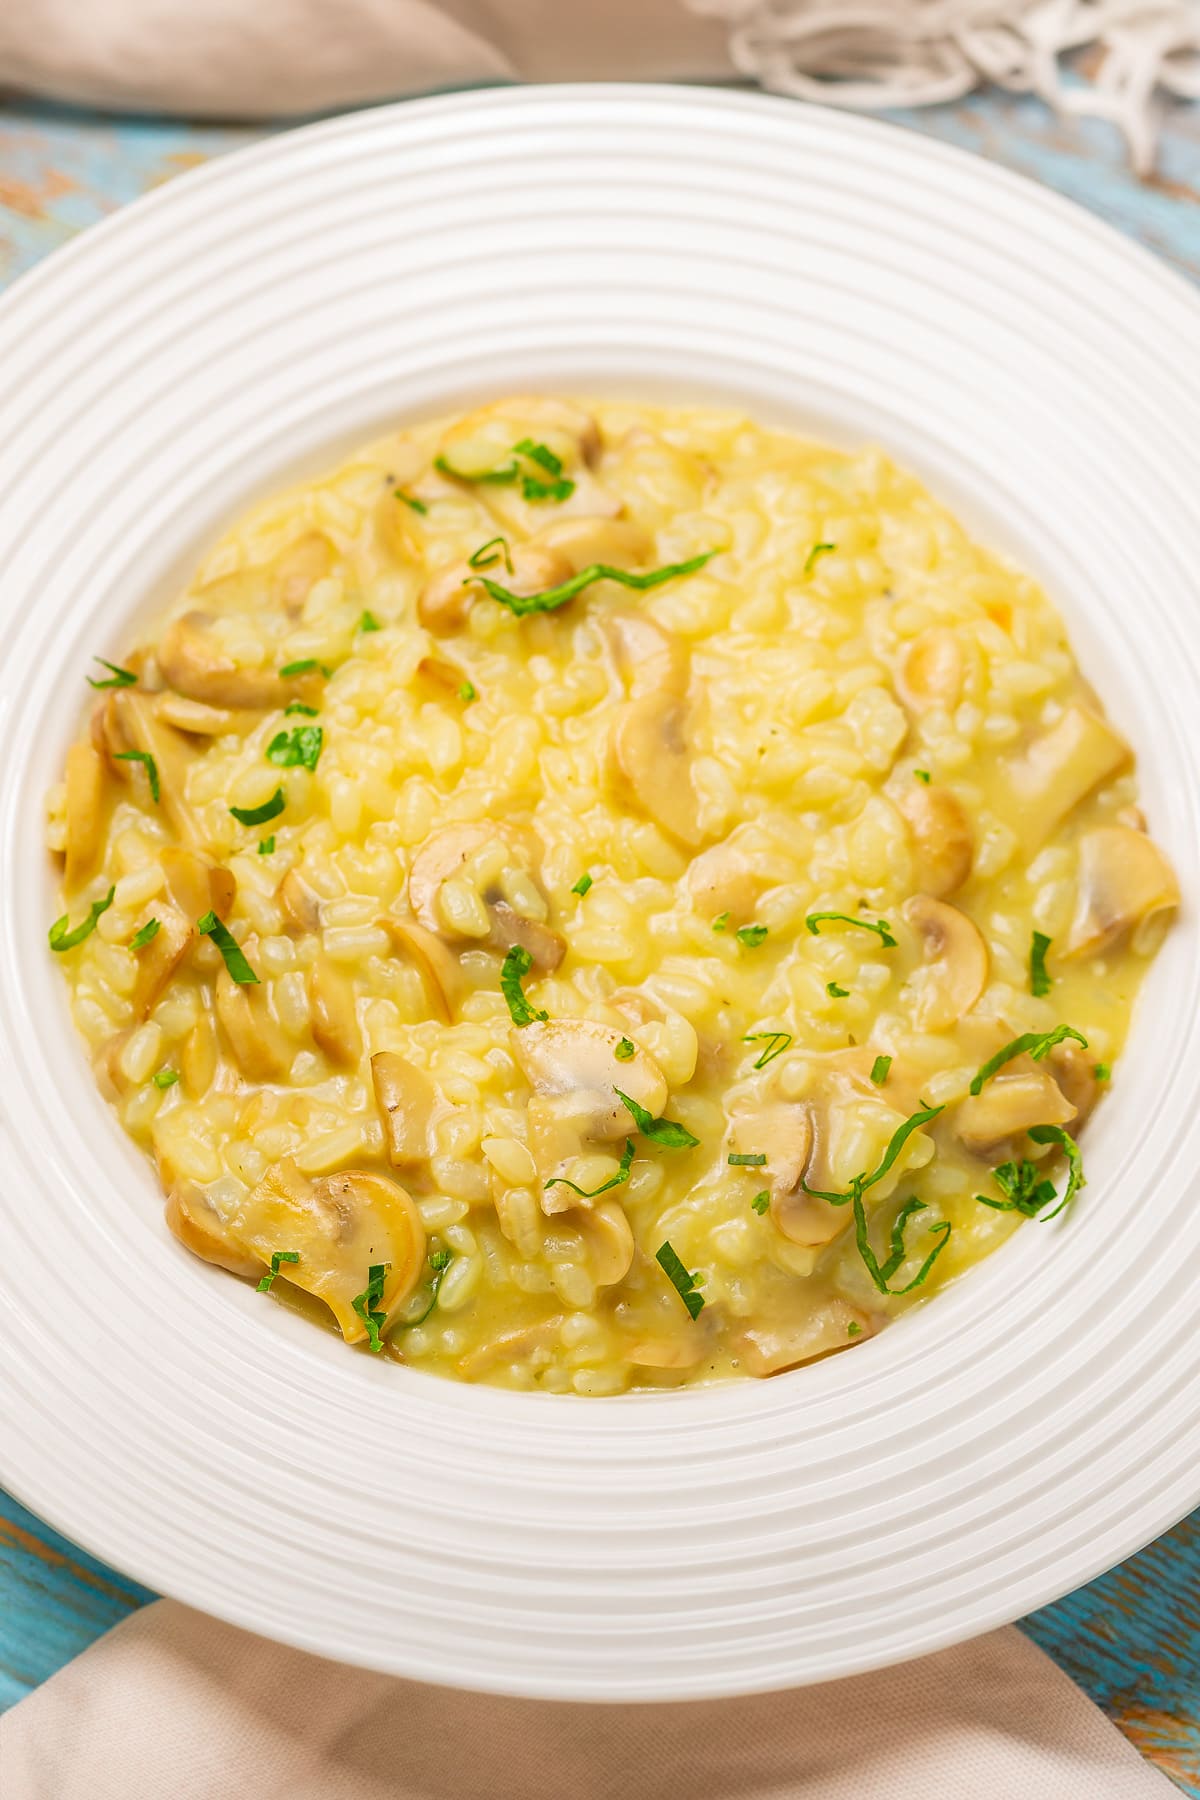 Vintage plate with creamy mushroom risotto decorated with chopped parsley.